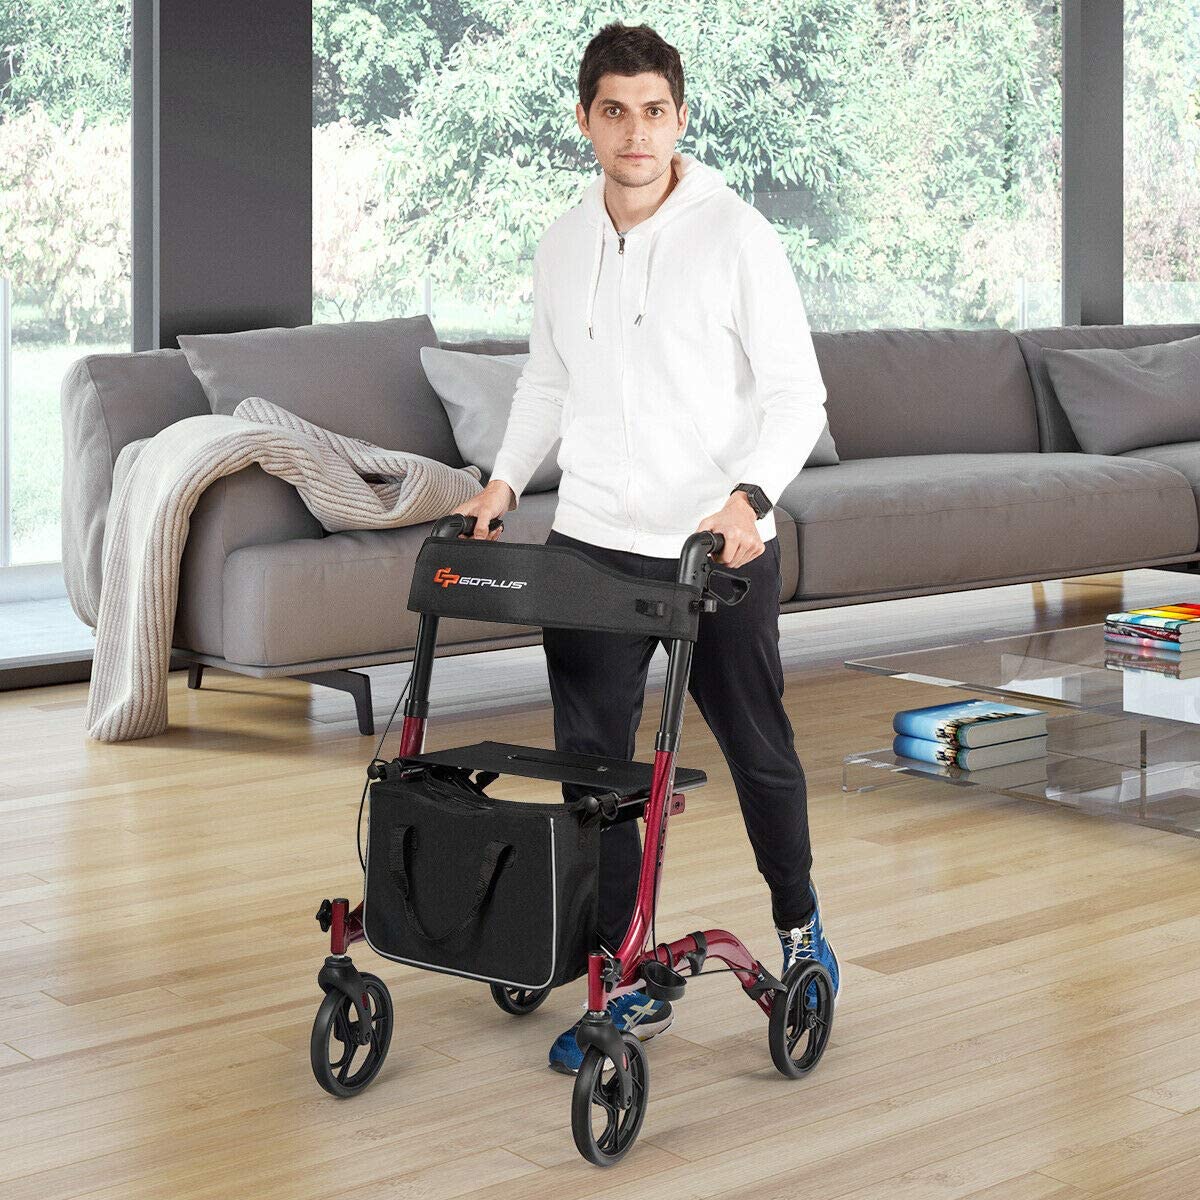 Chairliving Folding Rollator Walkers Lightweight Medical Drive Walker Mobility Walking Aid with Adjustable Handle and Storage Bag 